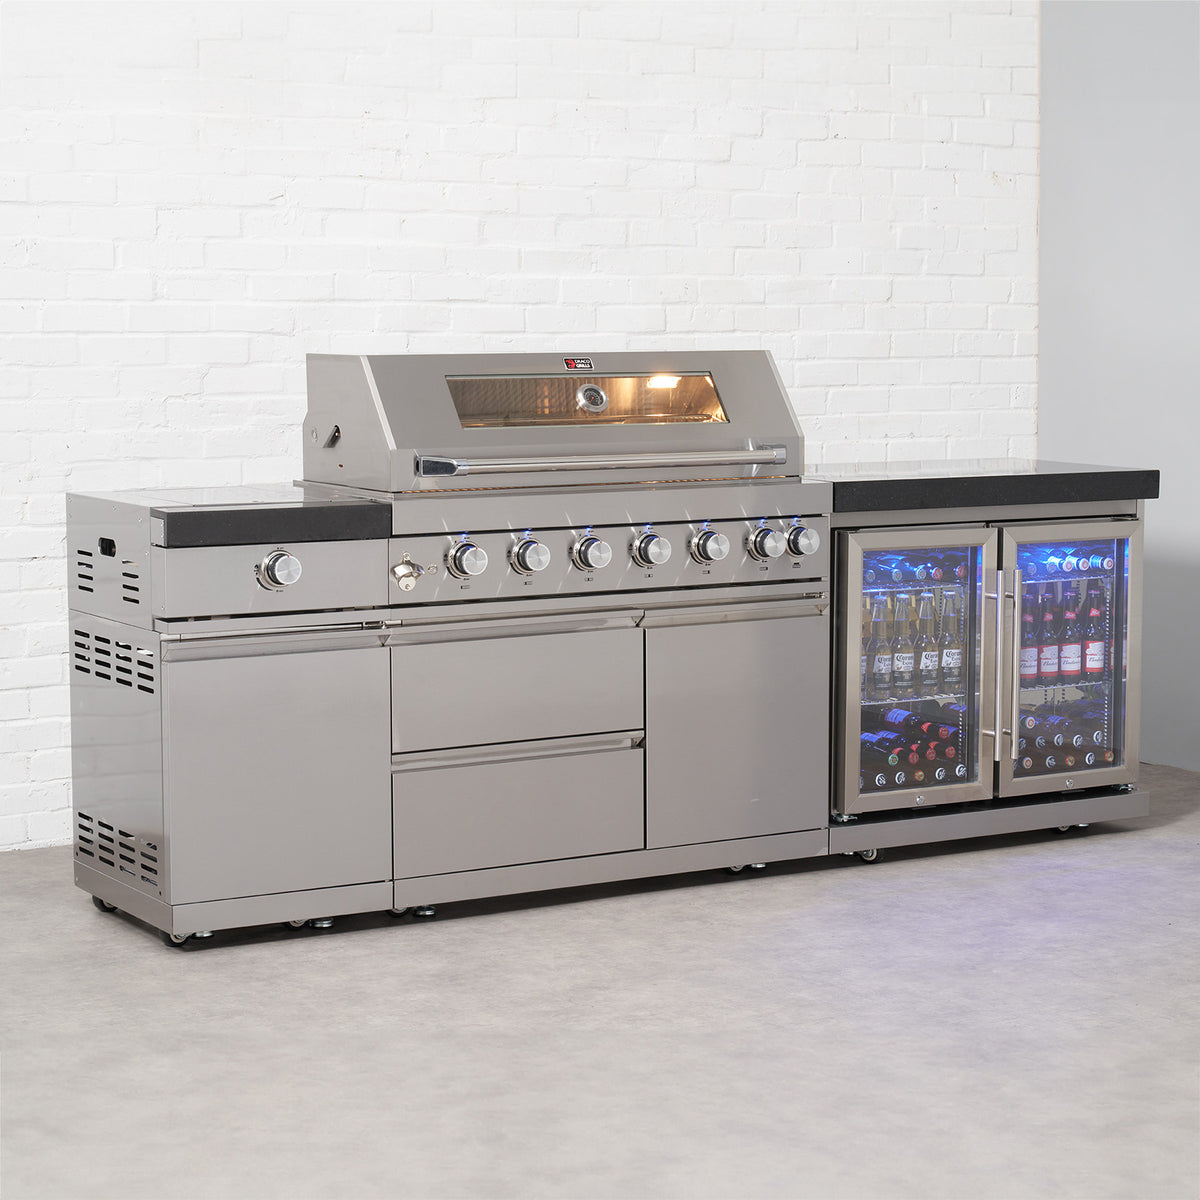 Draco Grills 6 Burner BBQ Modular Outdoor Kitchen with Sear Station and Double Fridge Unit